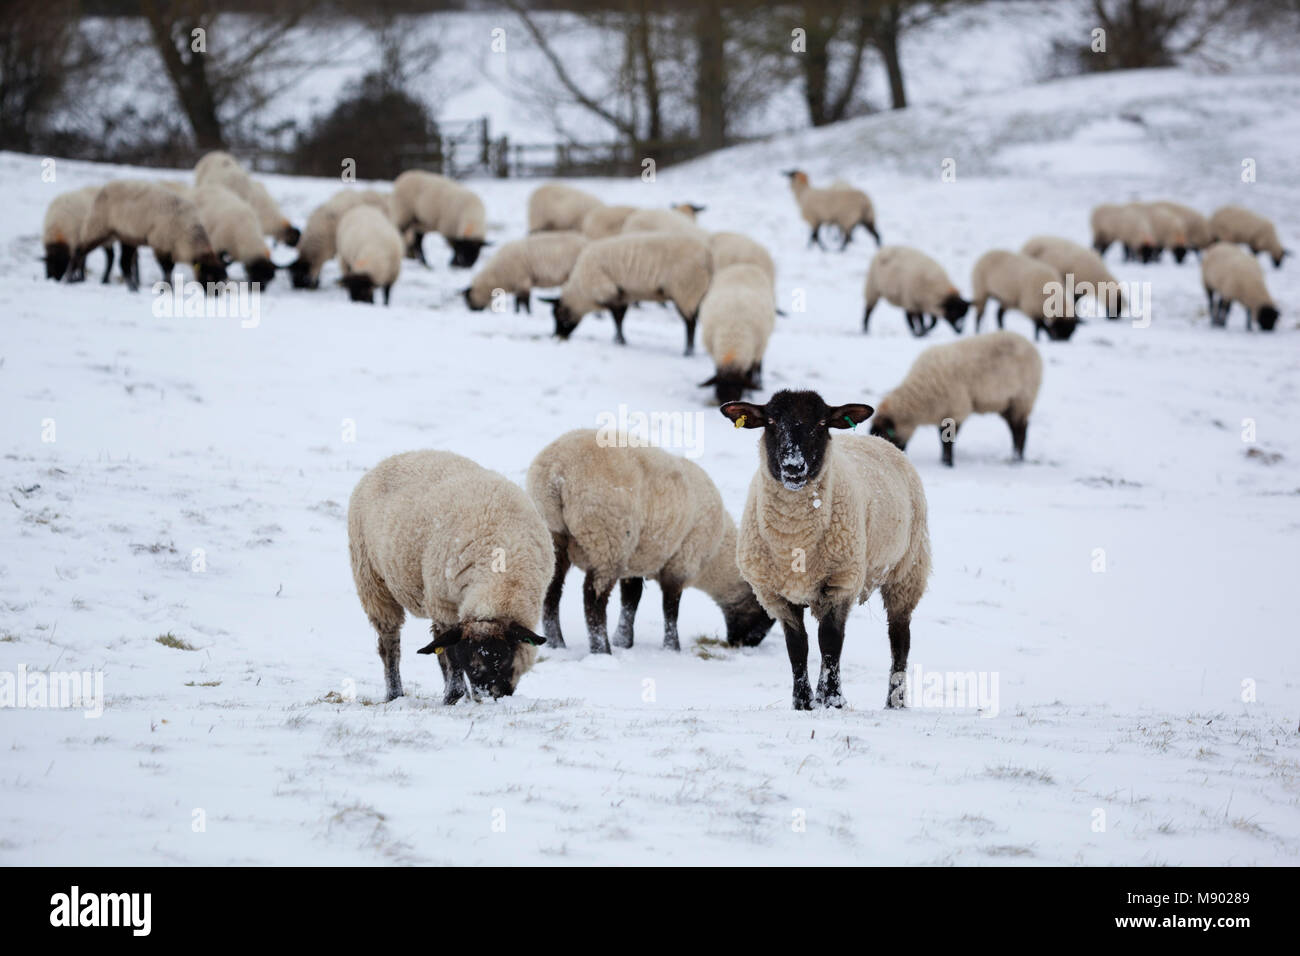 Black faced sheep in snow covered field, Chipping Campden, Cotswolds, Gloucestershire, England, United Kingdom, Europe Stock Photo